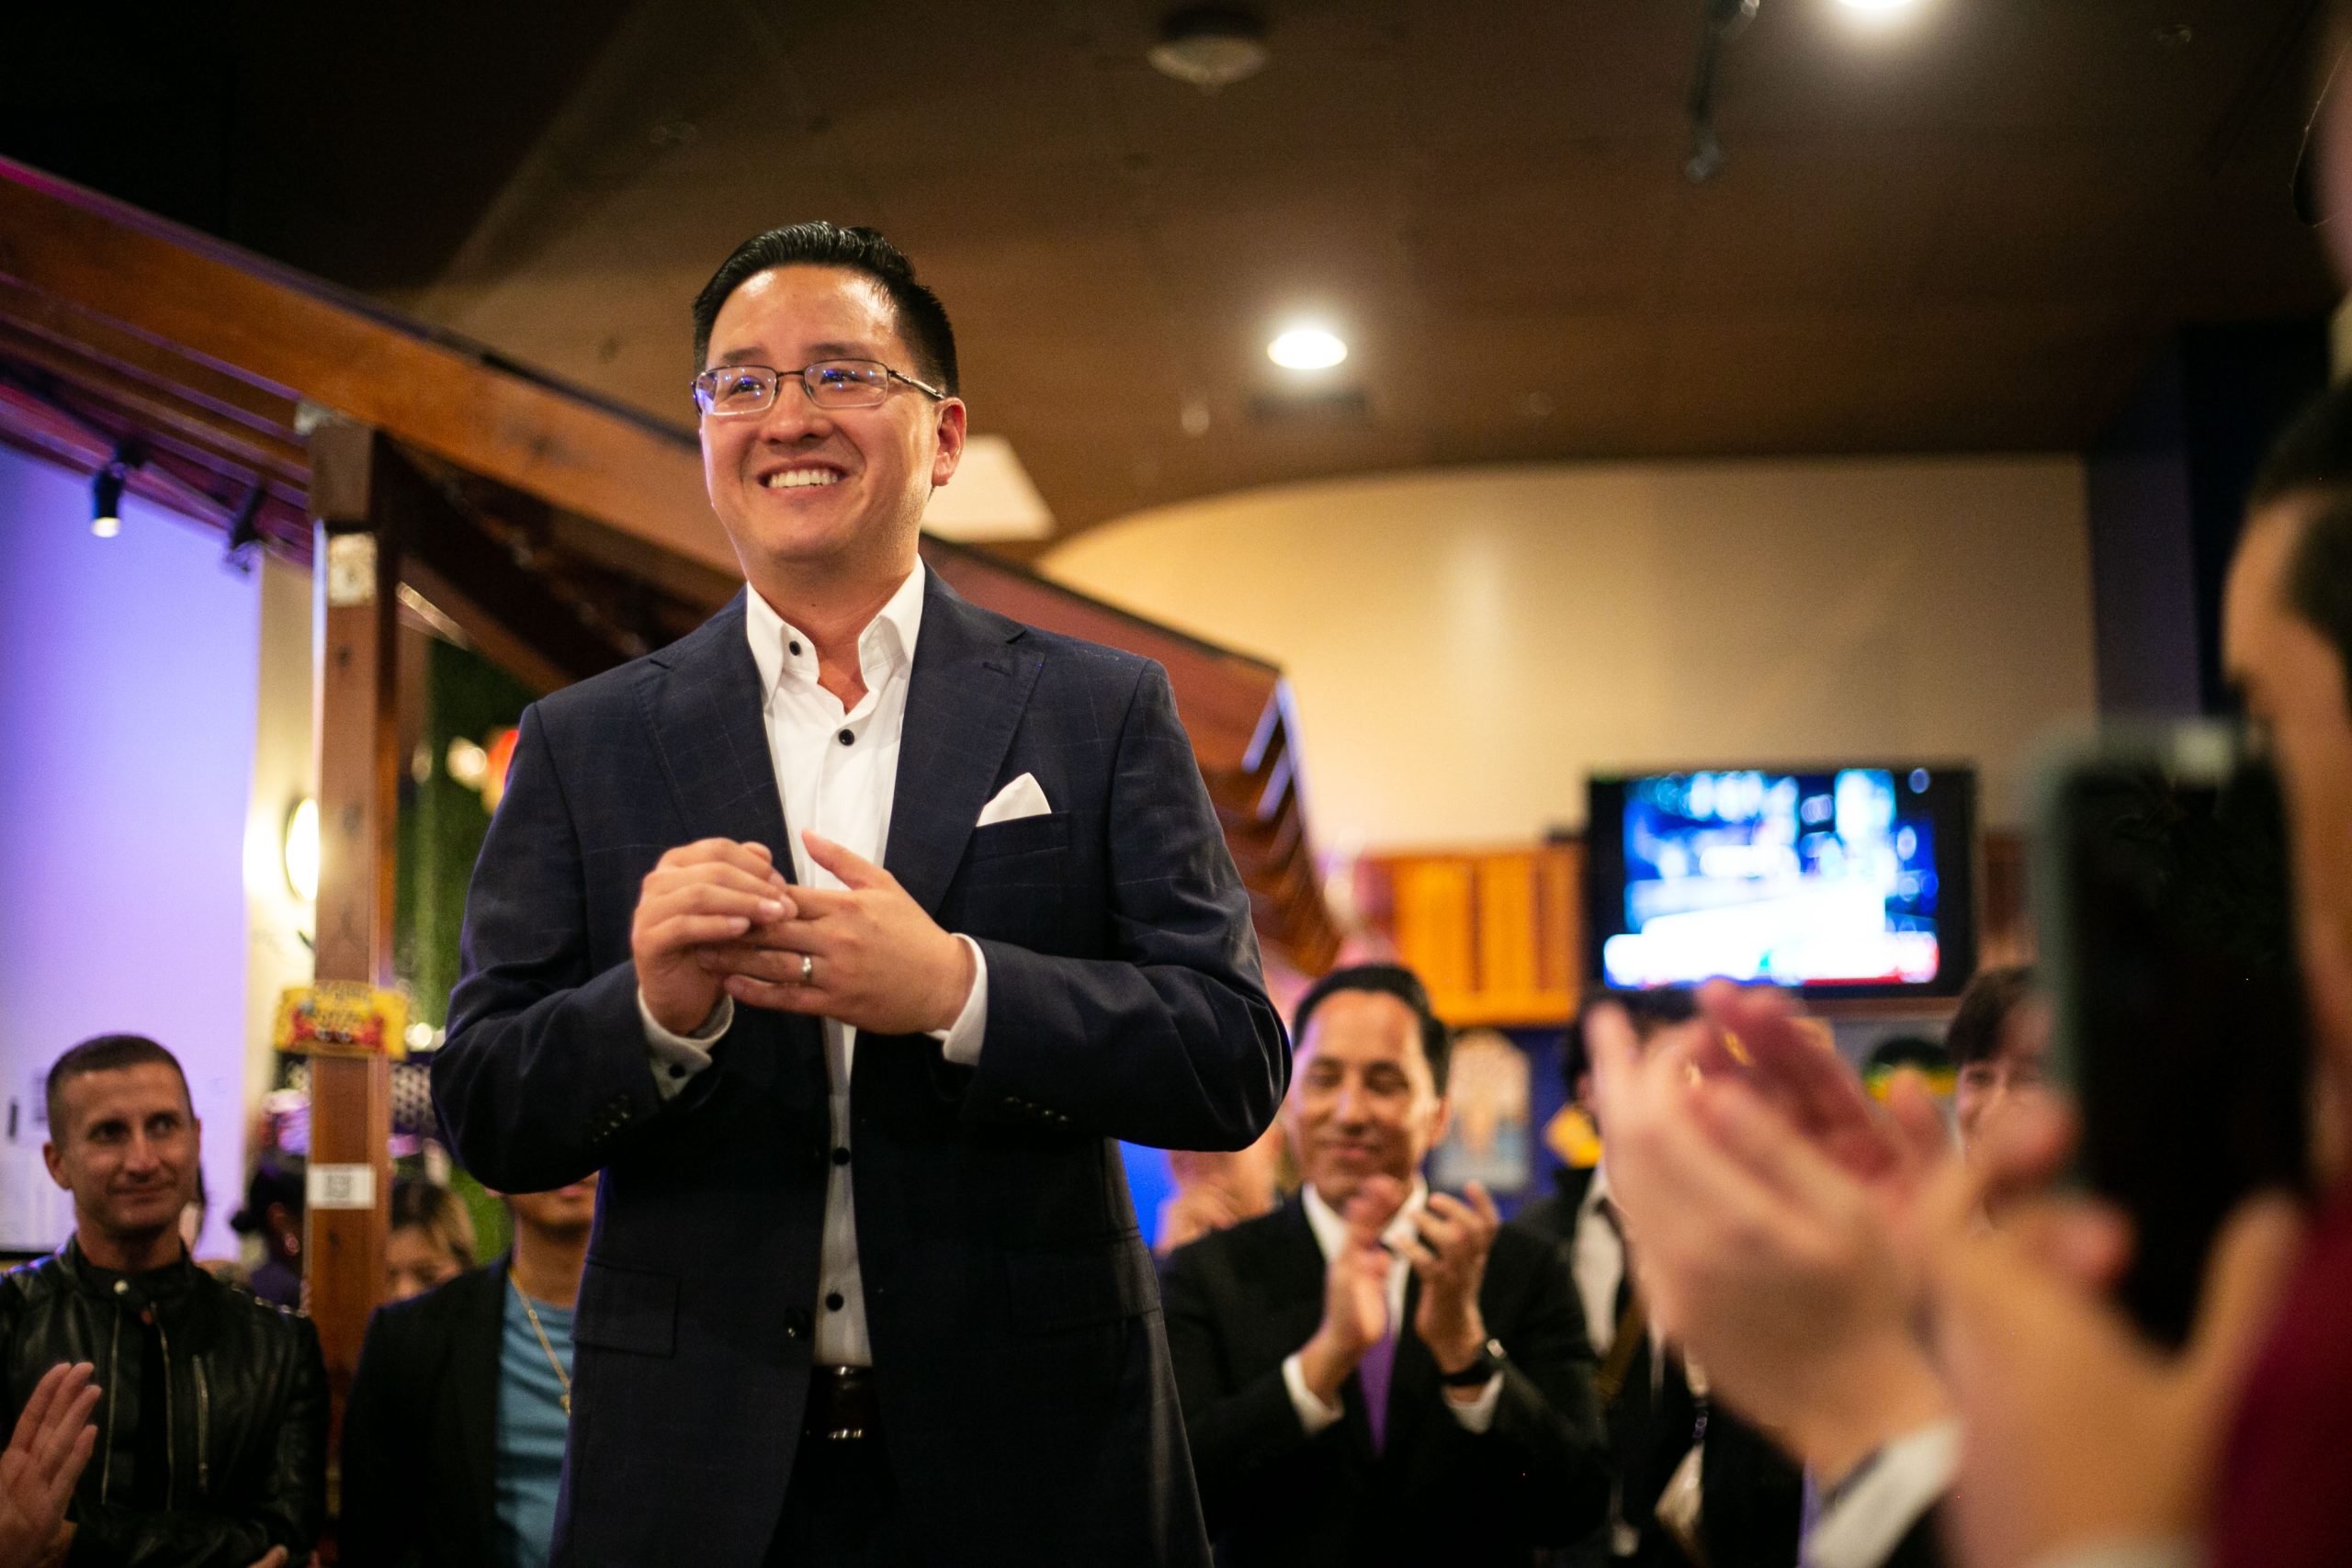 San Diego City Council candidate Kent Lee is applauded at the Crab Hut in San Diego on Nov. 8, 2022. / Photo for Brittany Cruz-Fejeran for Voice of San Diego